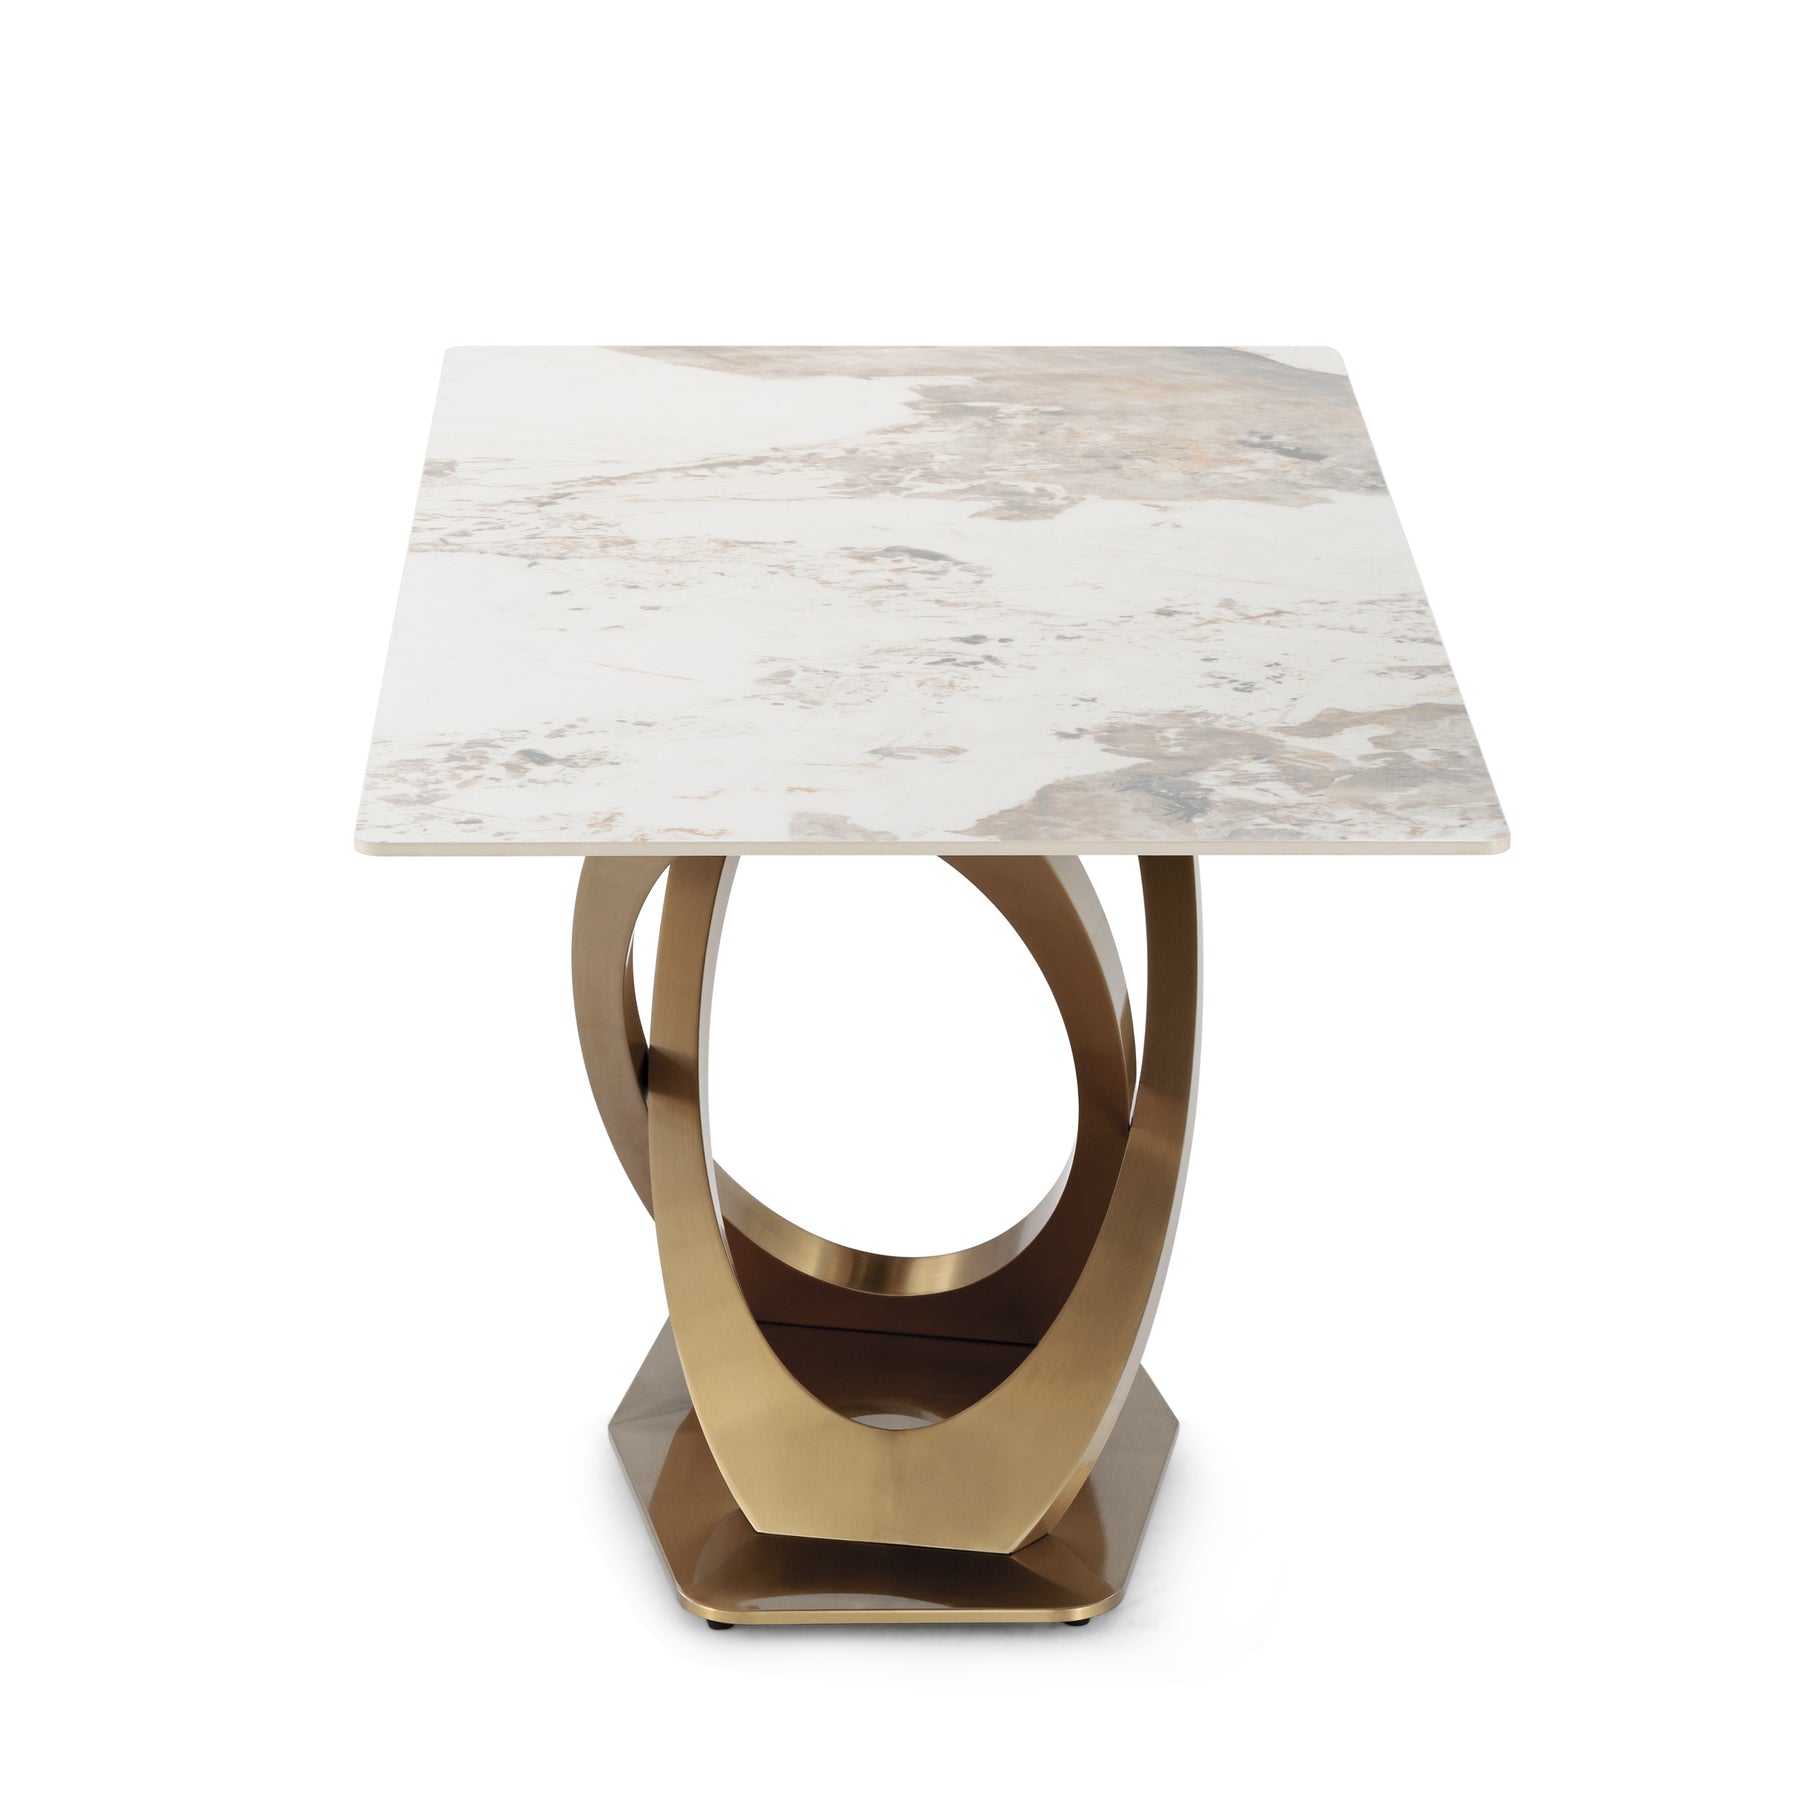 Modern Stone White Dining Table with Rectangular Marble Tabletop, Golden Stainless Steel Oval-Legged legs, Dining Room Table for 4-8